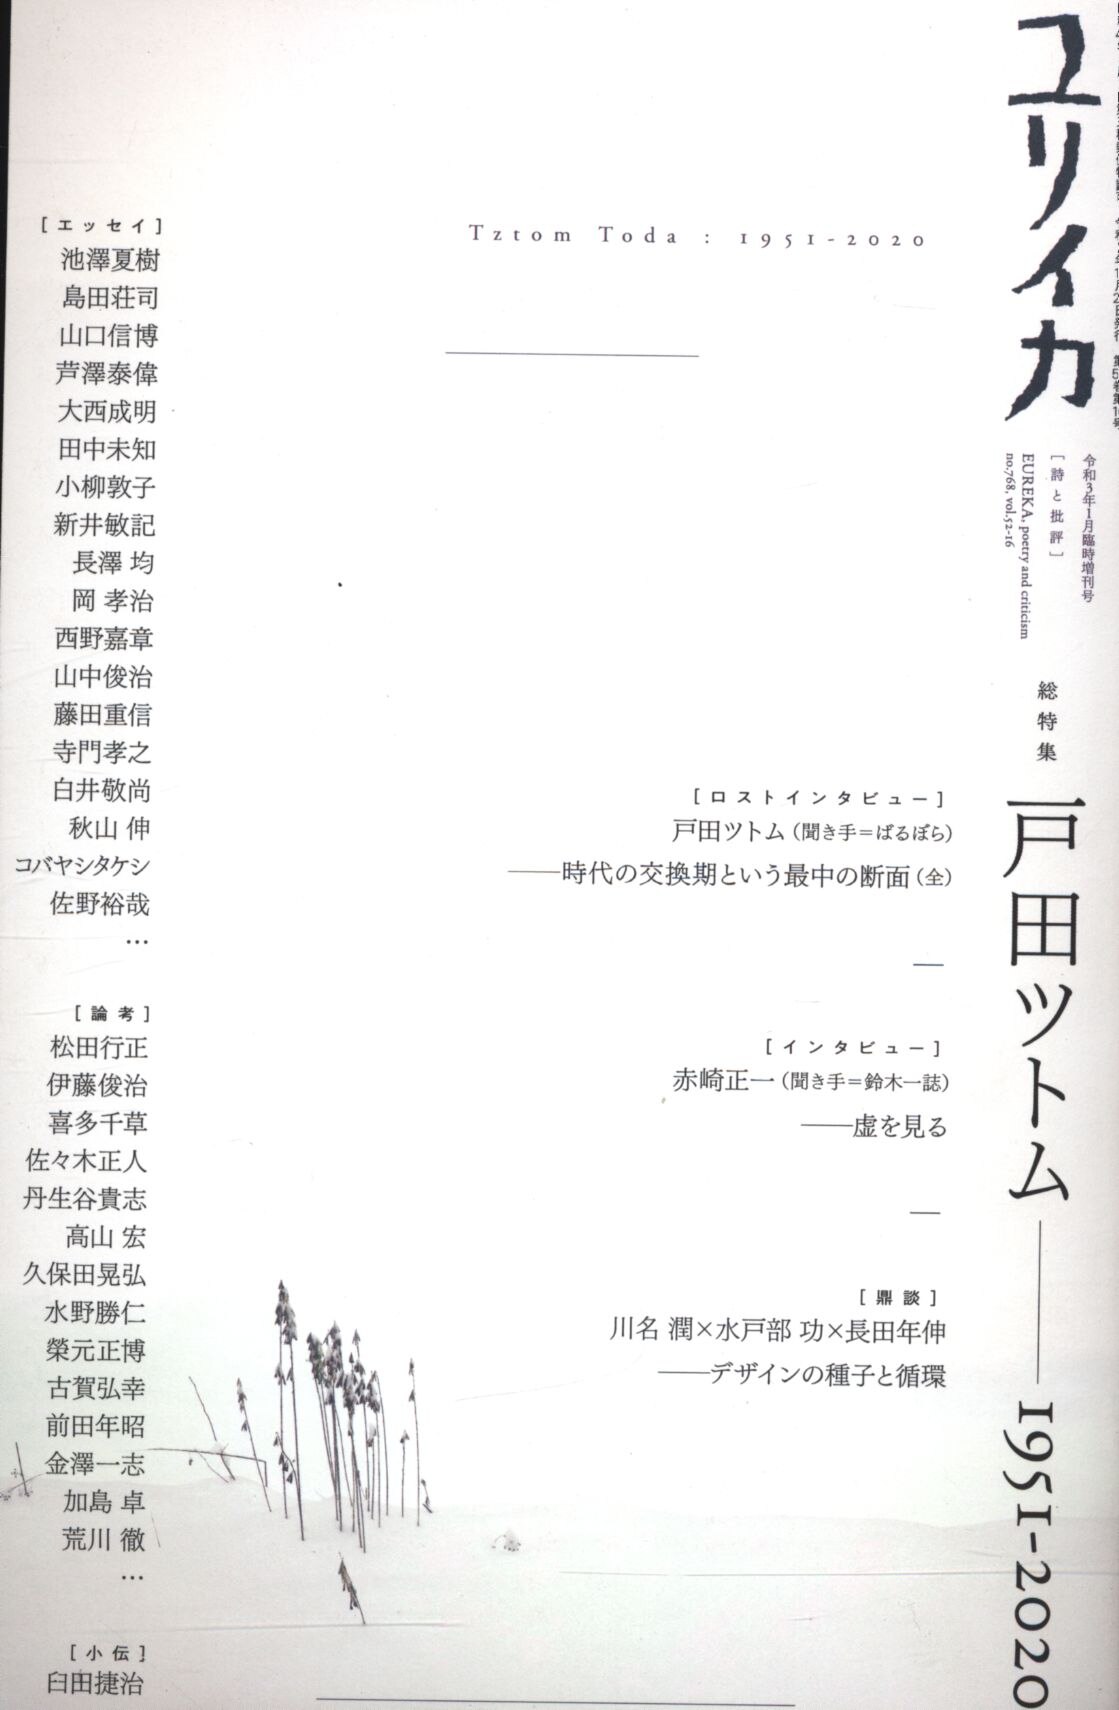 Eureka Poetry And Criticism Reiwa January 3 Special Special Issue Tsutomu Toda Mandarake Online Shop